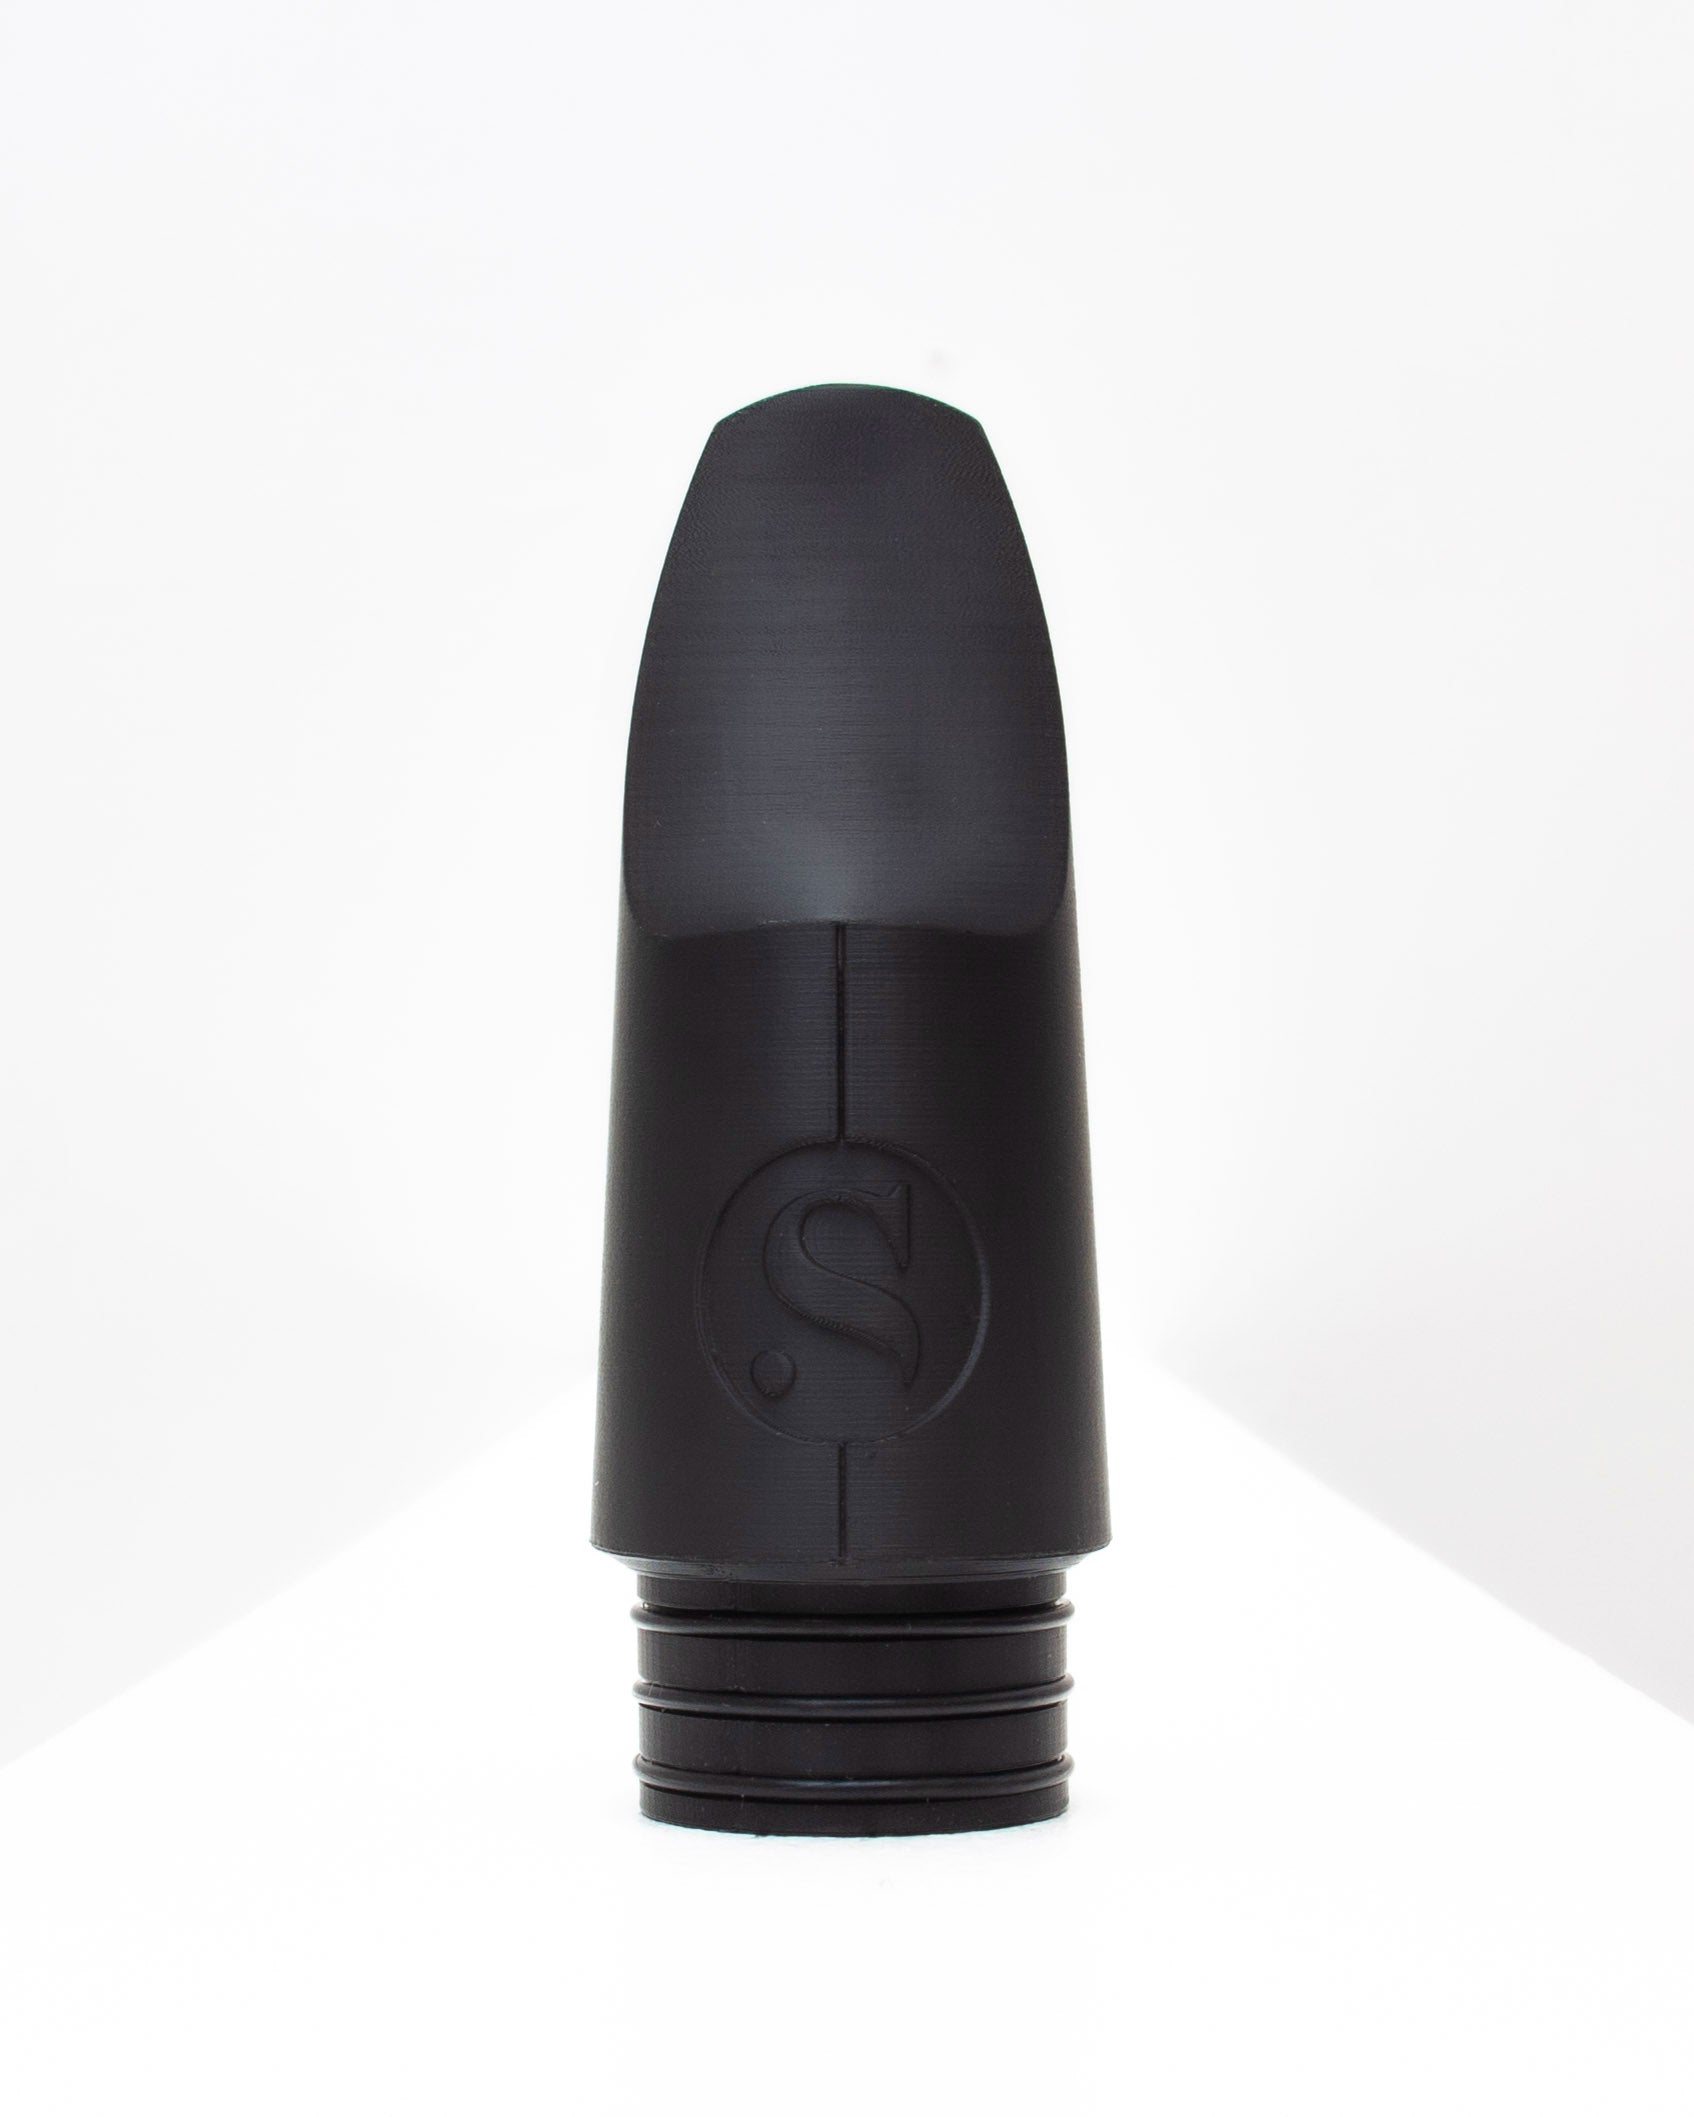 Bass Signature Clarinet mouthpiece - Daro Behroozi by Syos - Pitch Black